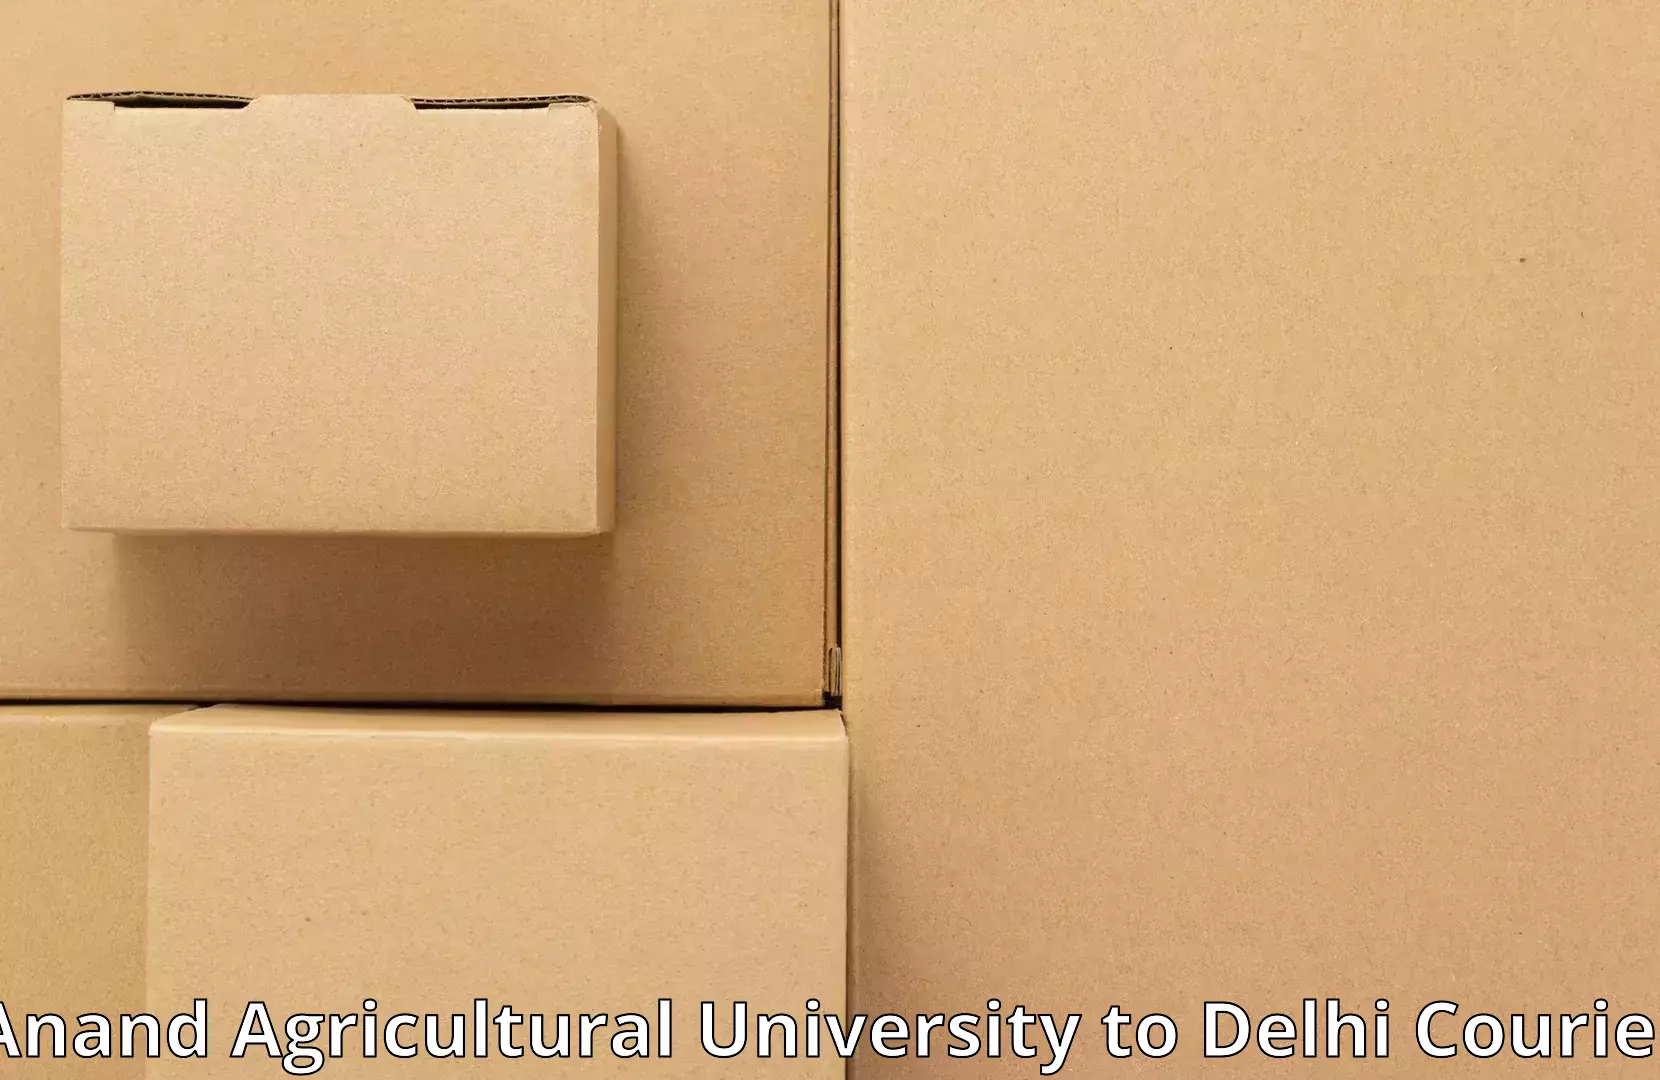 Residential moving experts Anand Agricultural University to Delhi